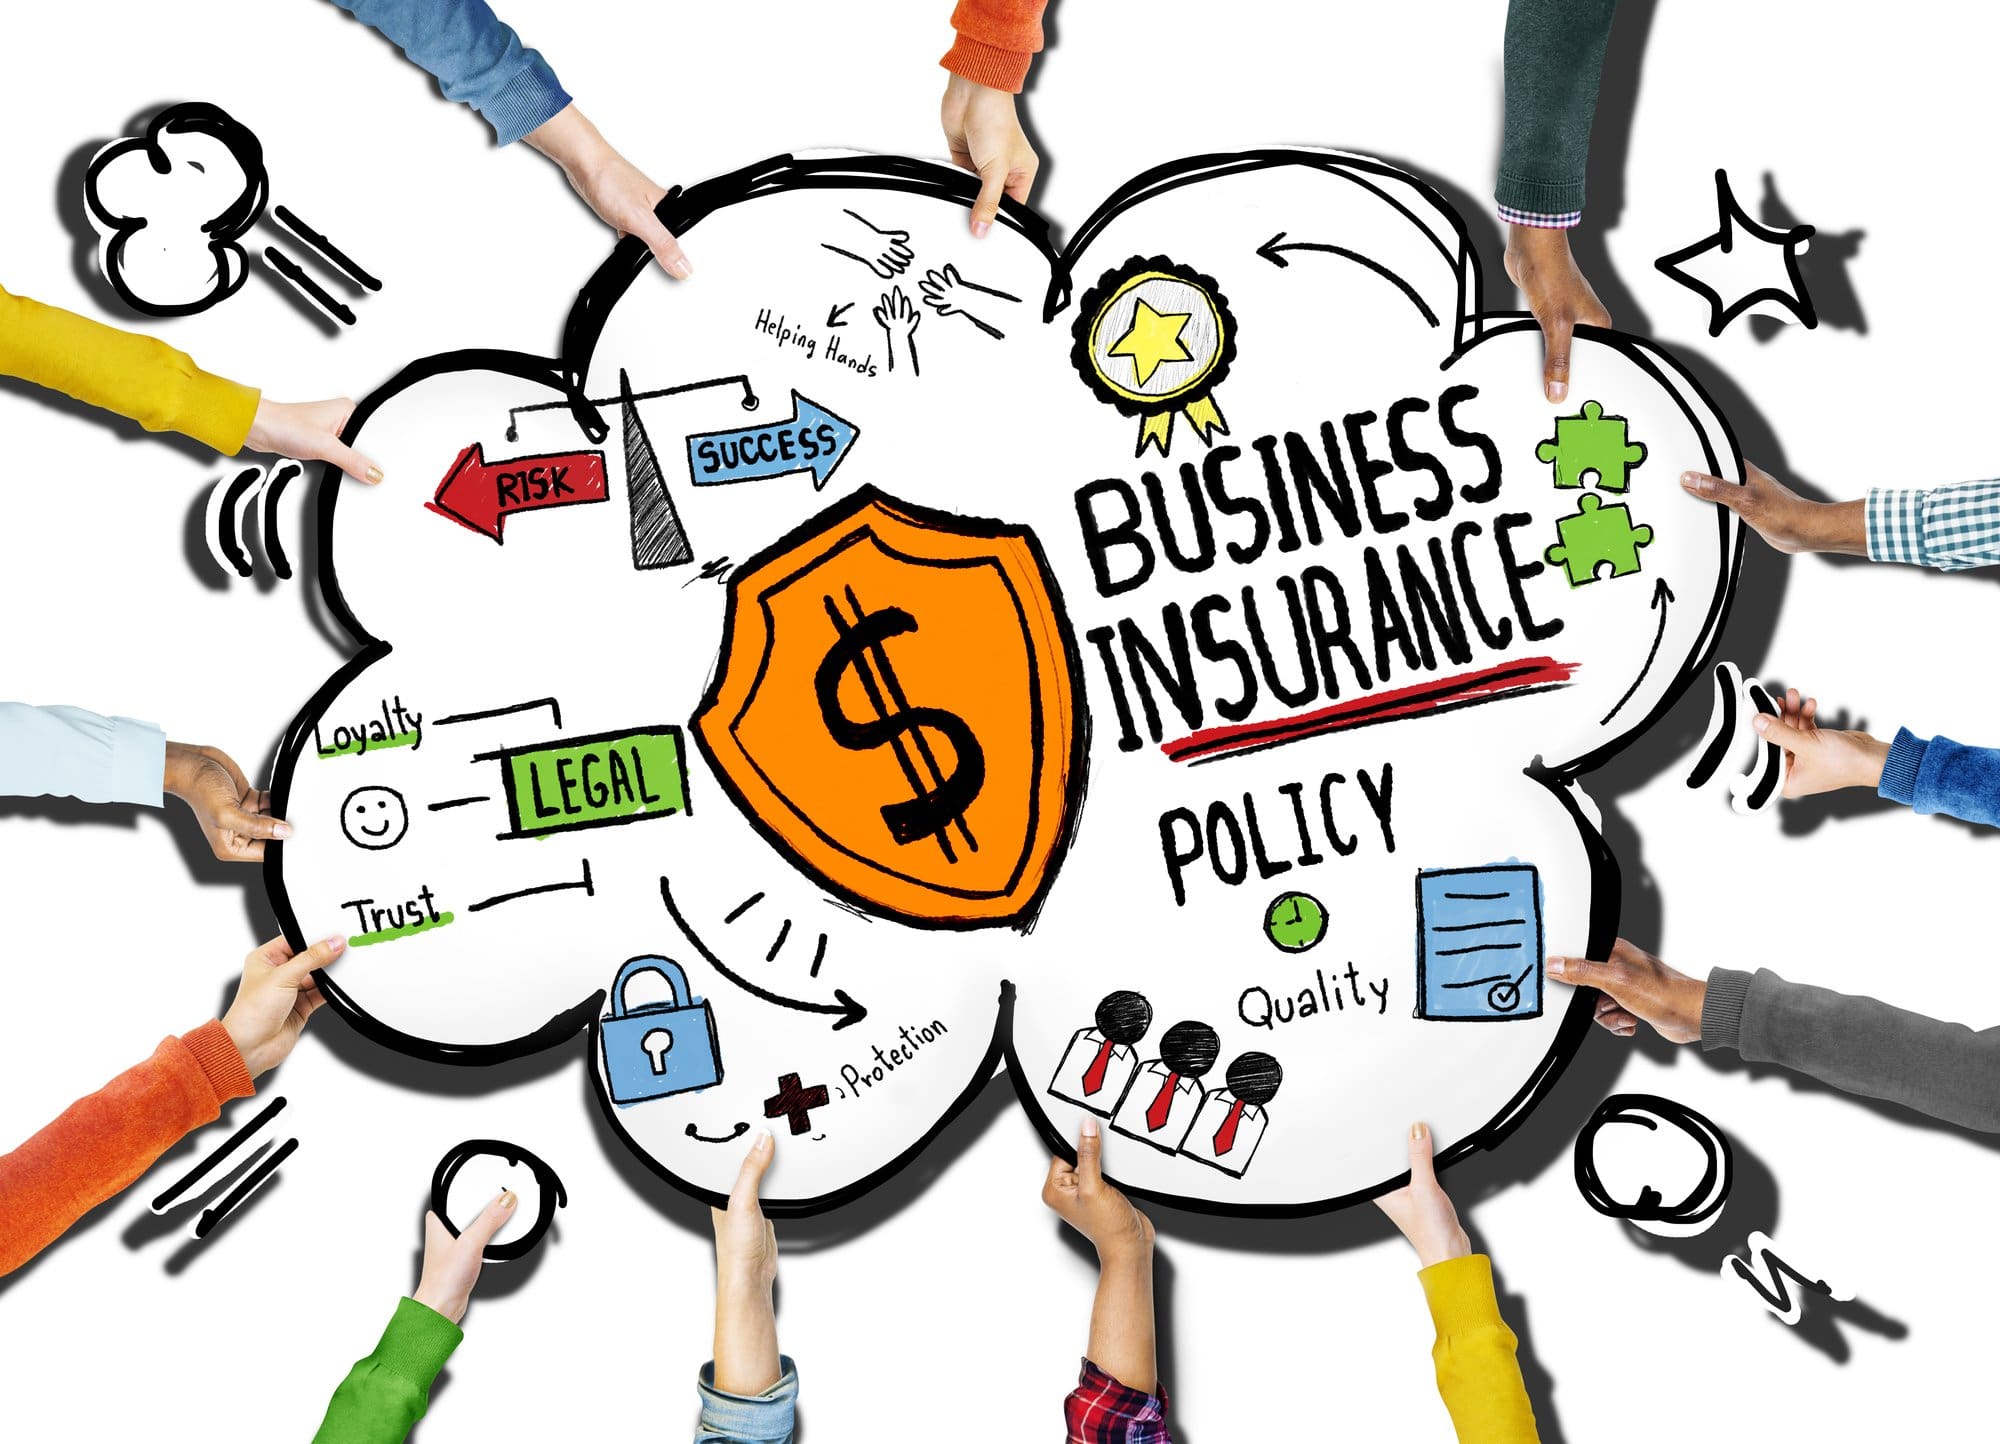 Hands of people holding business insurance policy concept